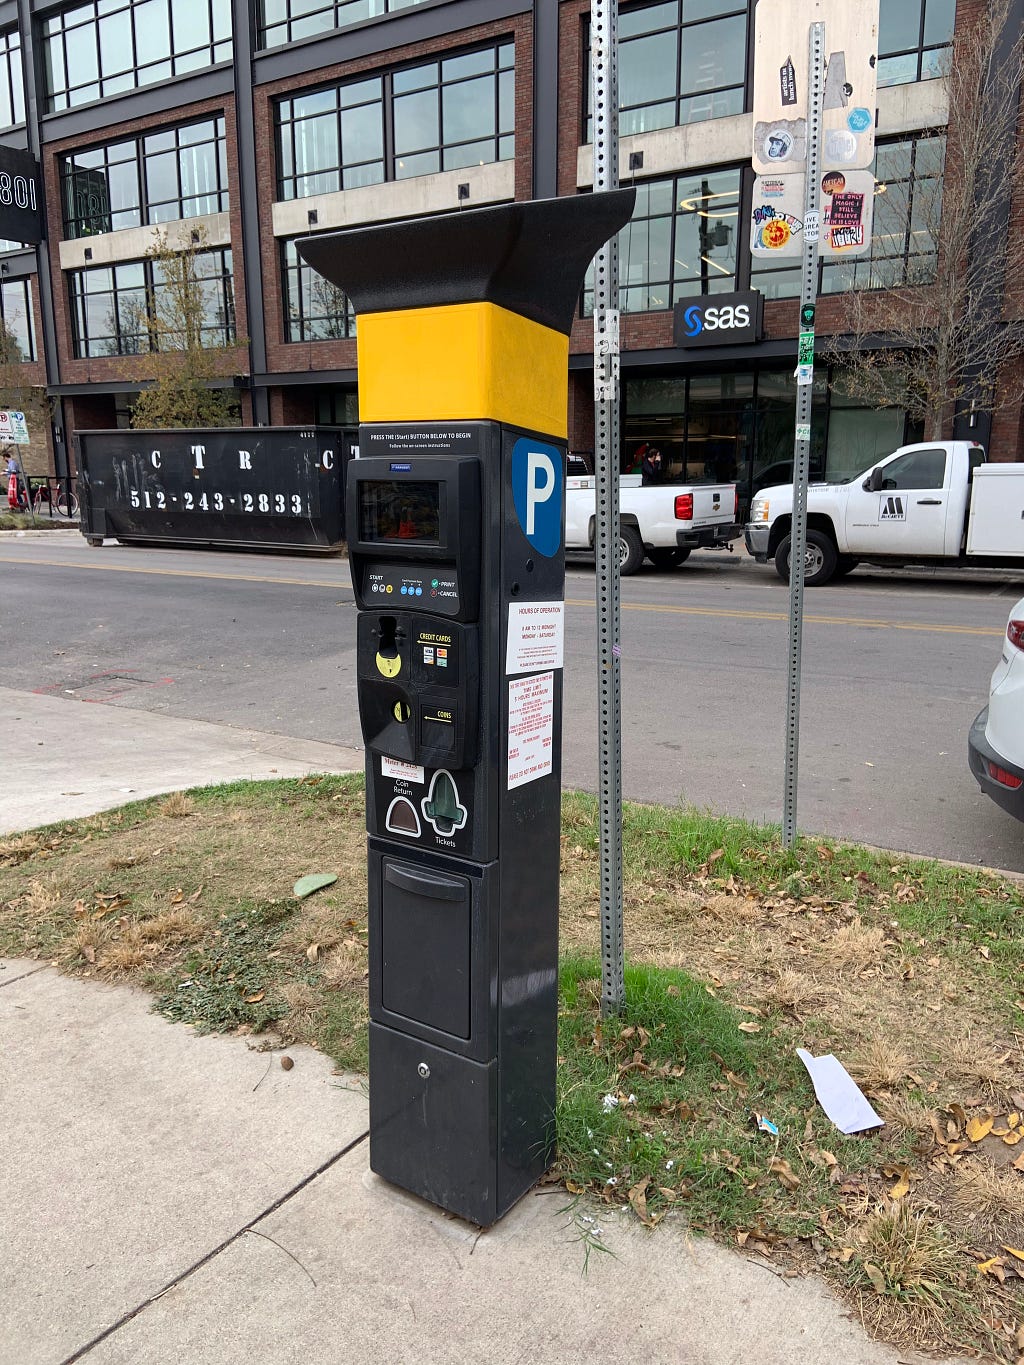 A typical parking meter in Austin Texas, that prints stickers to show payment. Drivers put the stickers inside their windows.